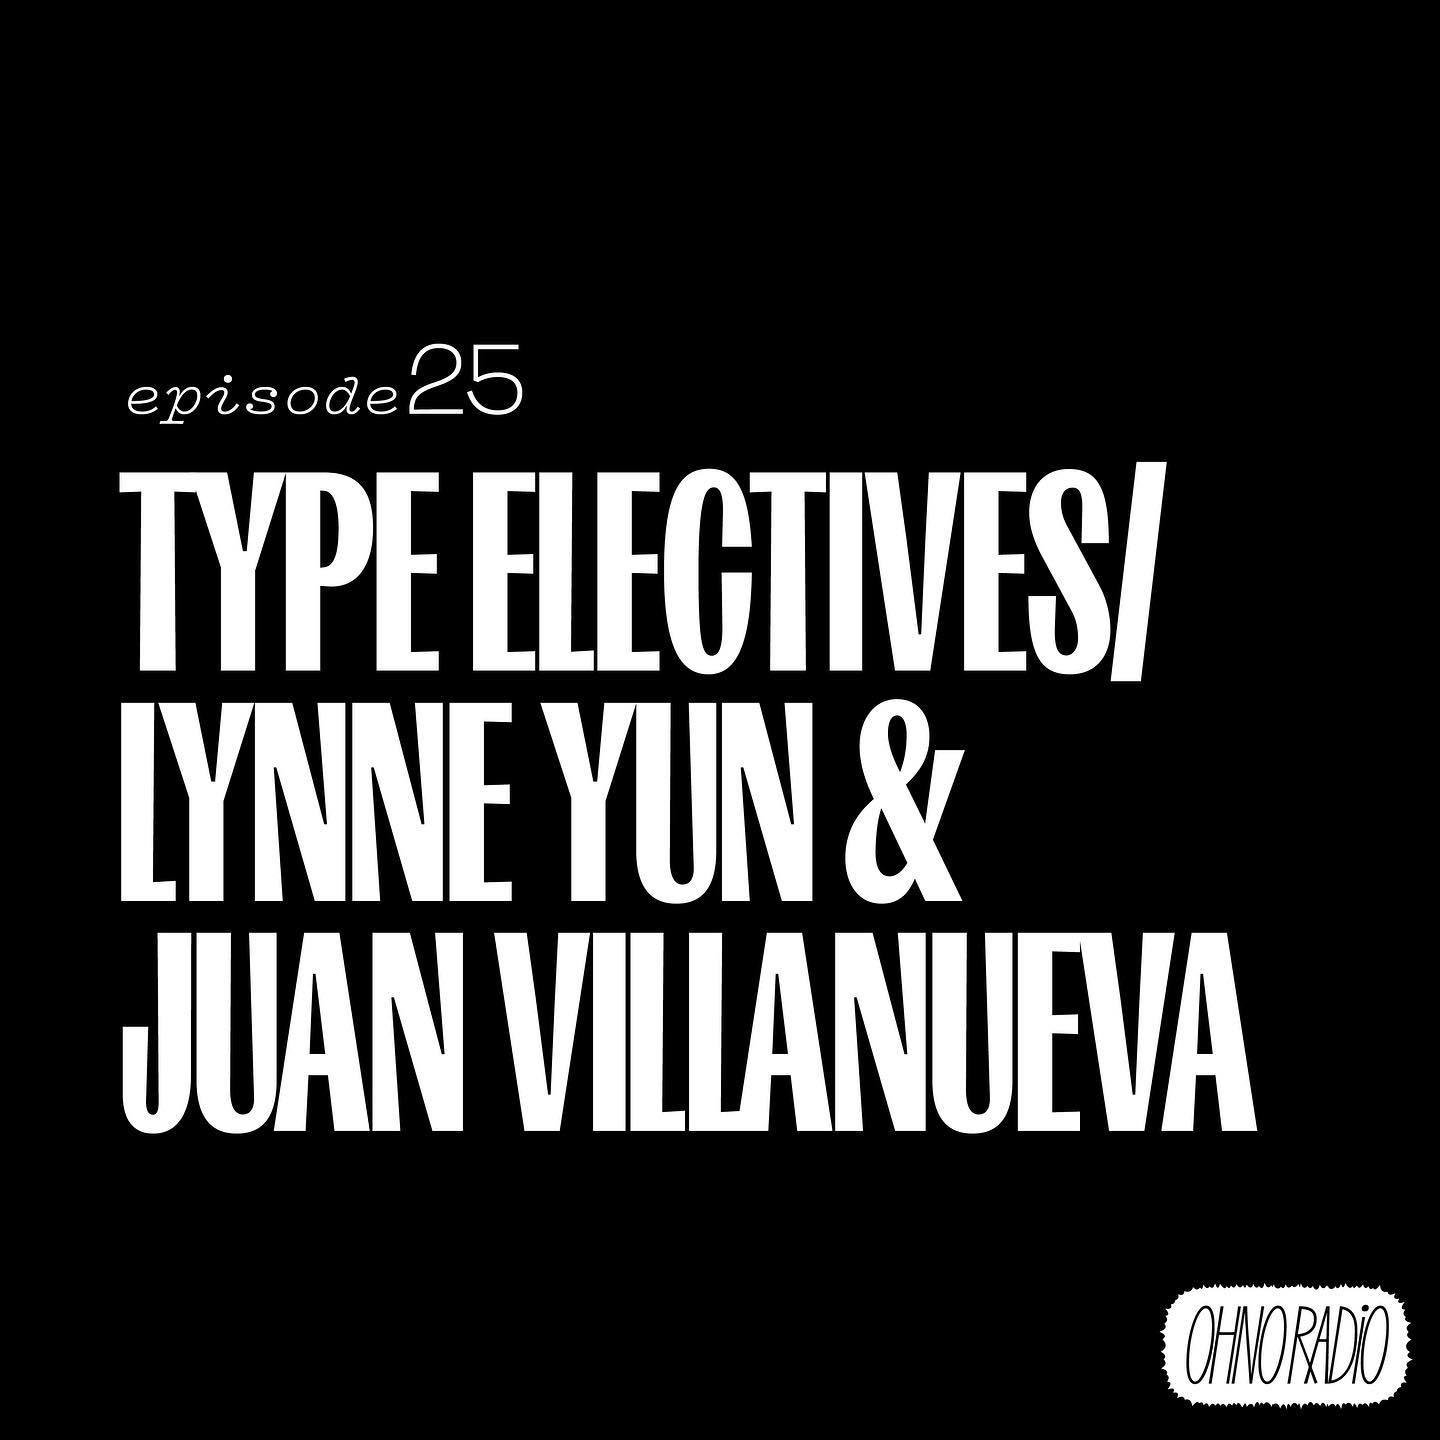 White text on black background. It says "Episode 25, Type Electives - Lynne Yun and Juan Villanueva"